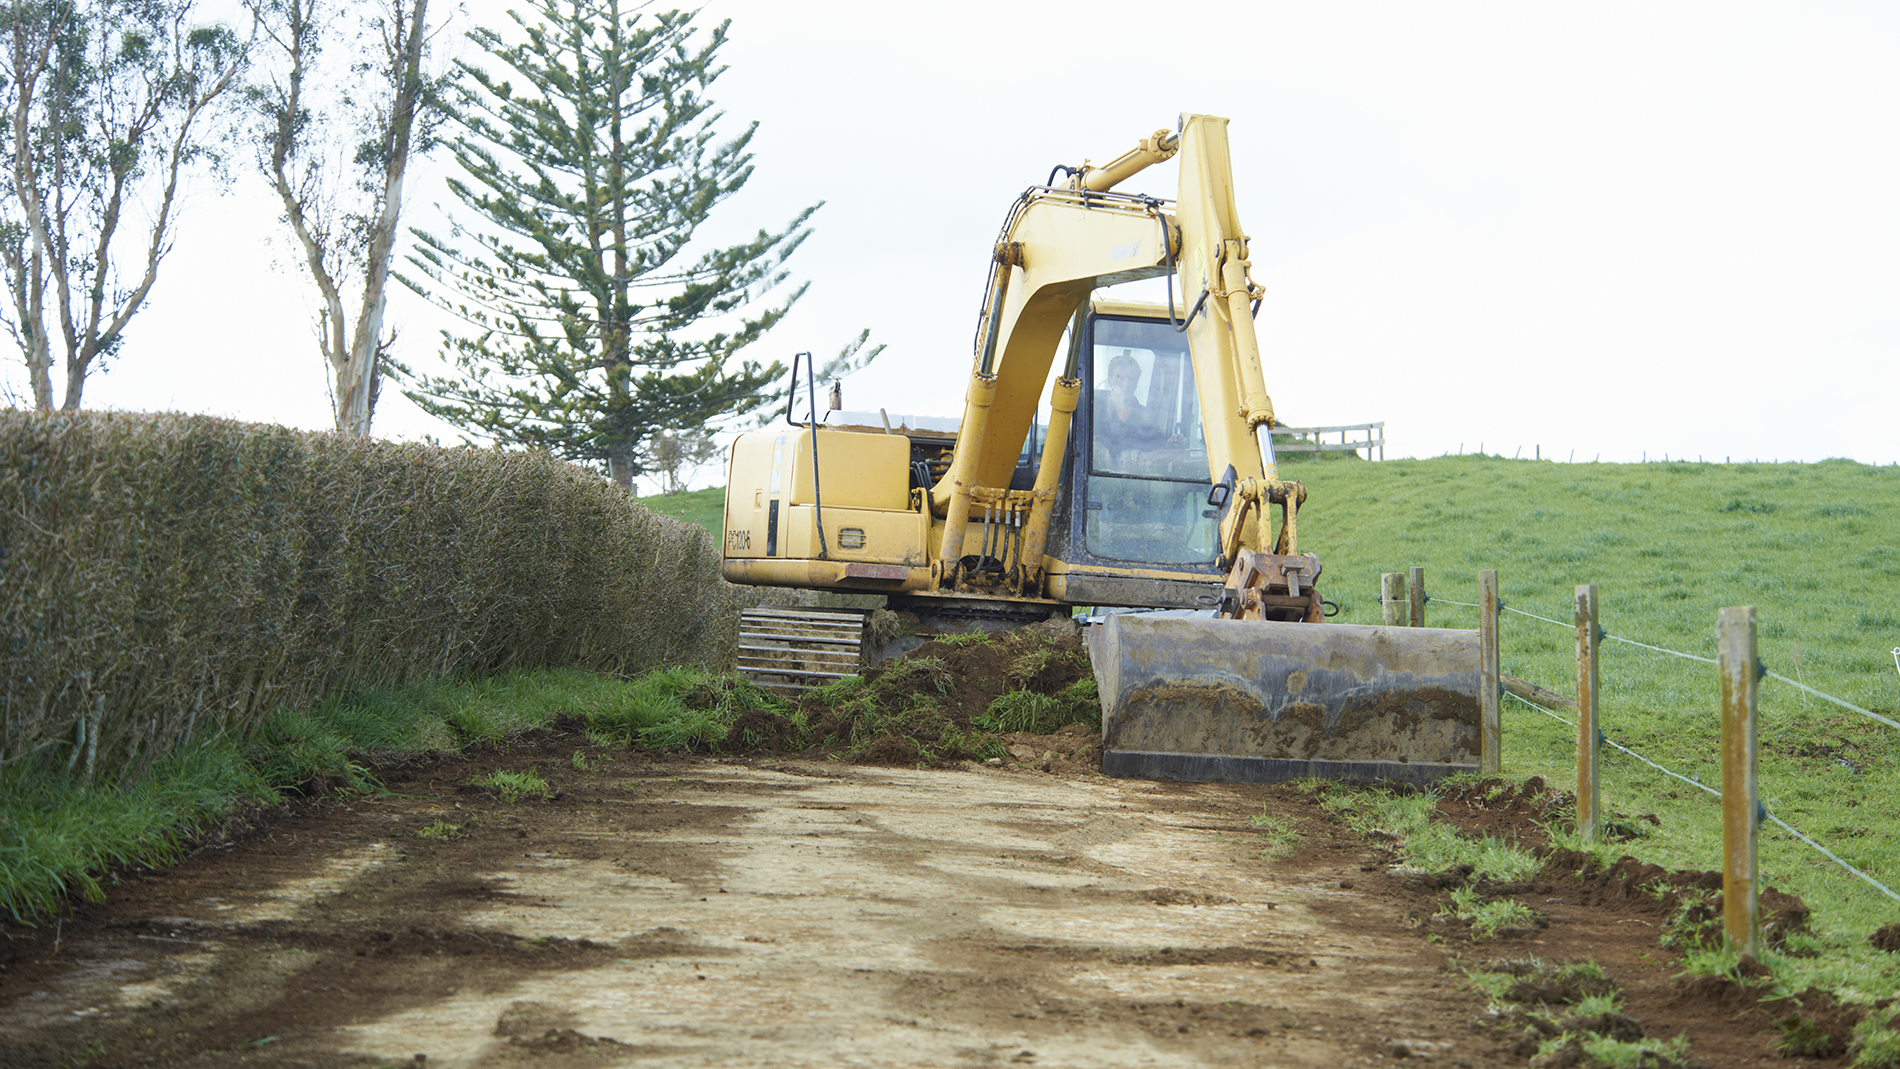 Image - Yellow digger moving soil and grass